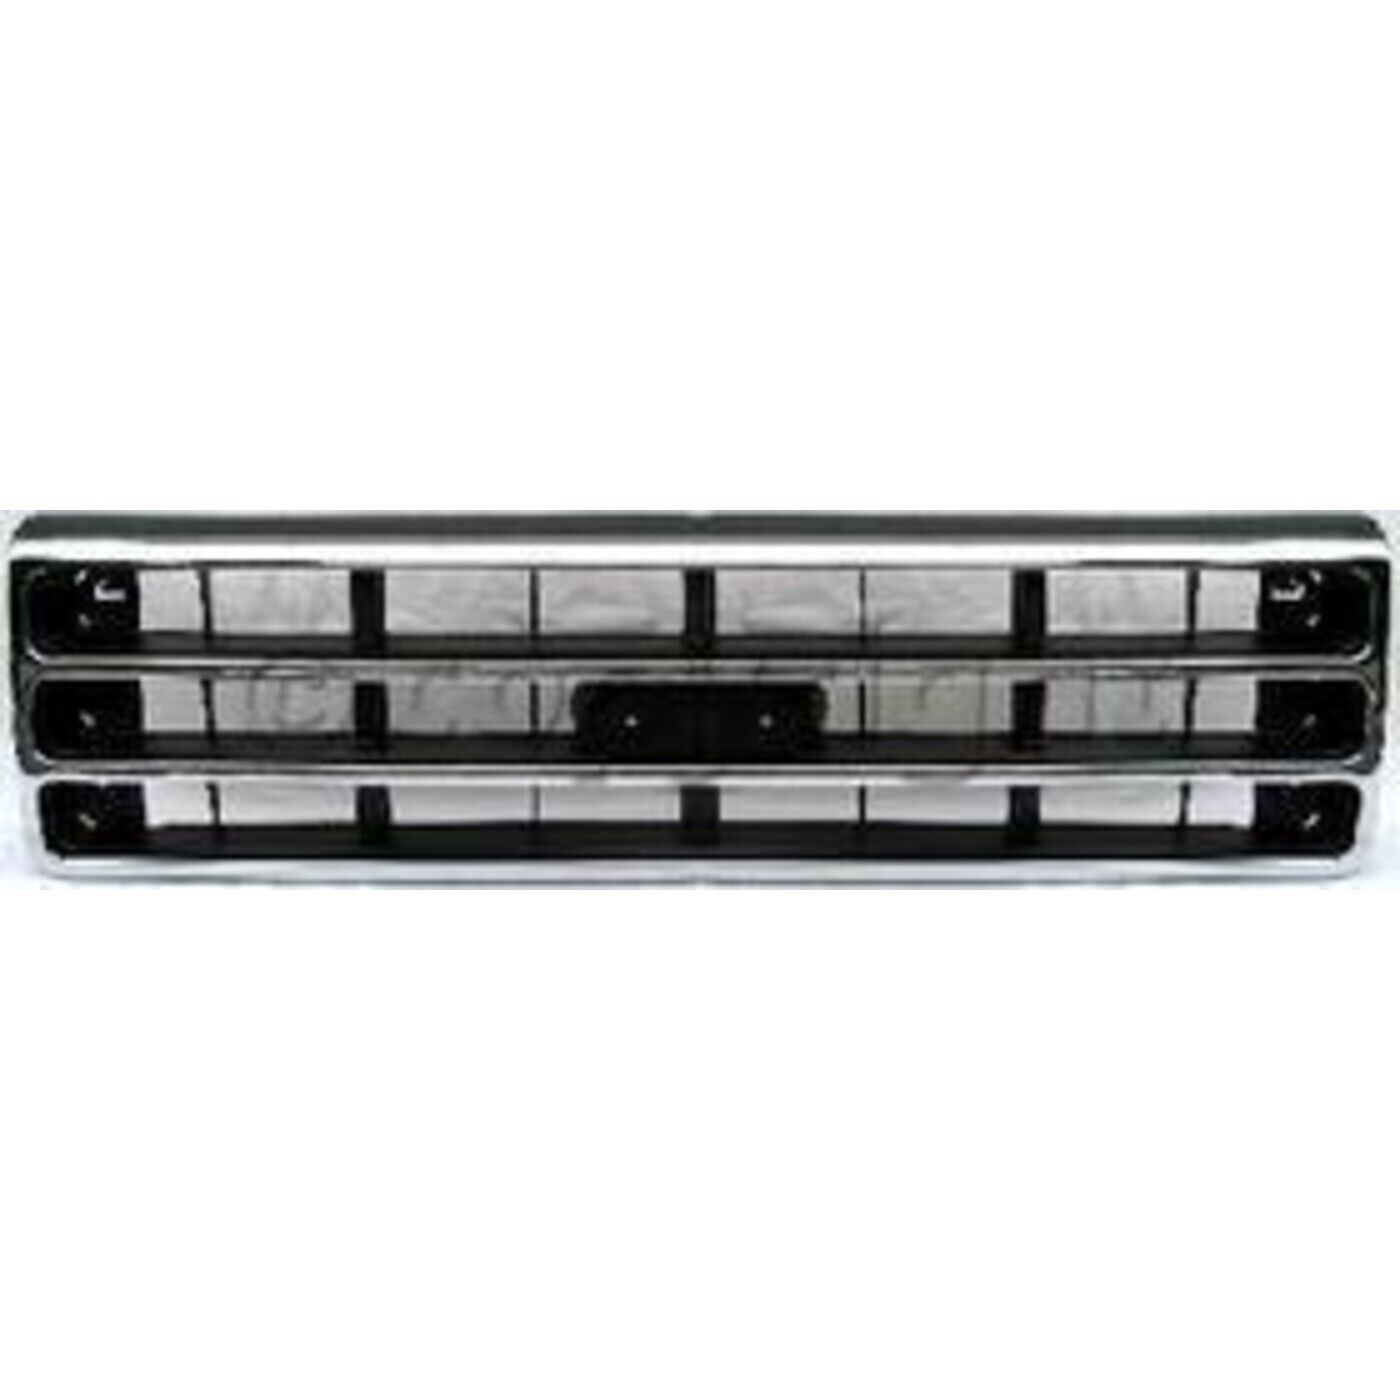 Grille For 89-91 Ford F-150 F-250 Chrome Shell w/ Silver Insert Plastic